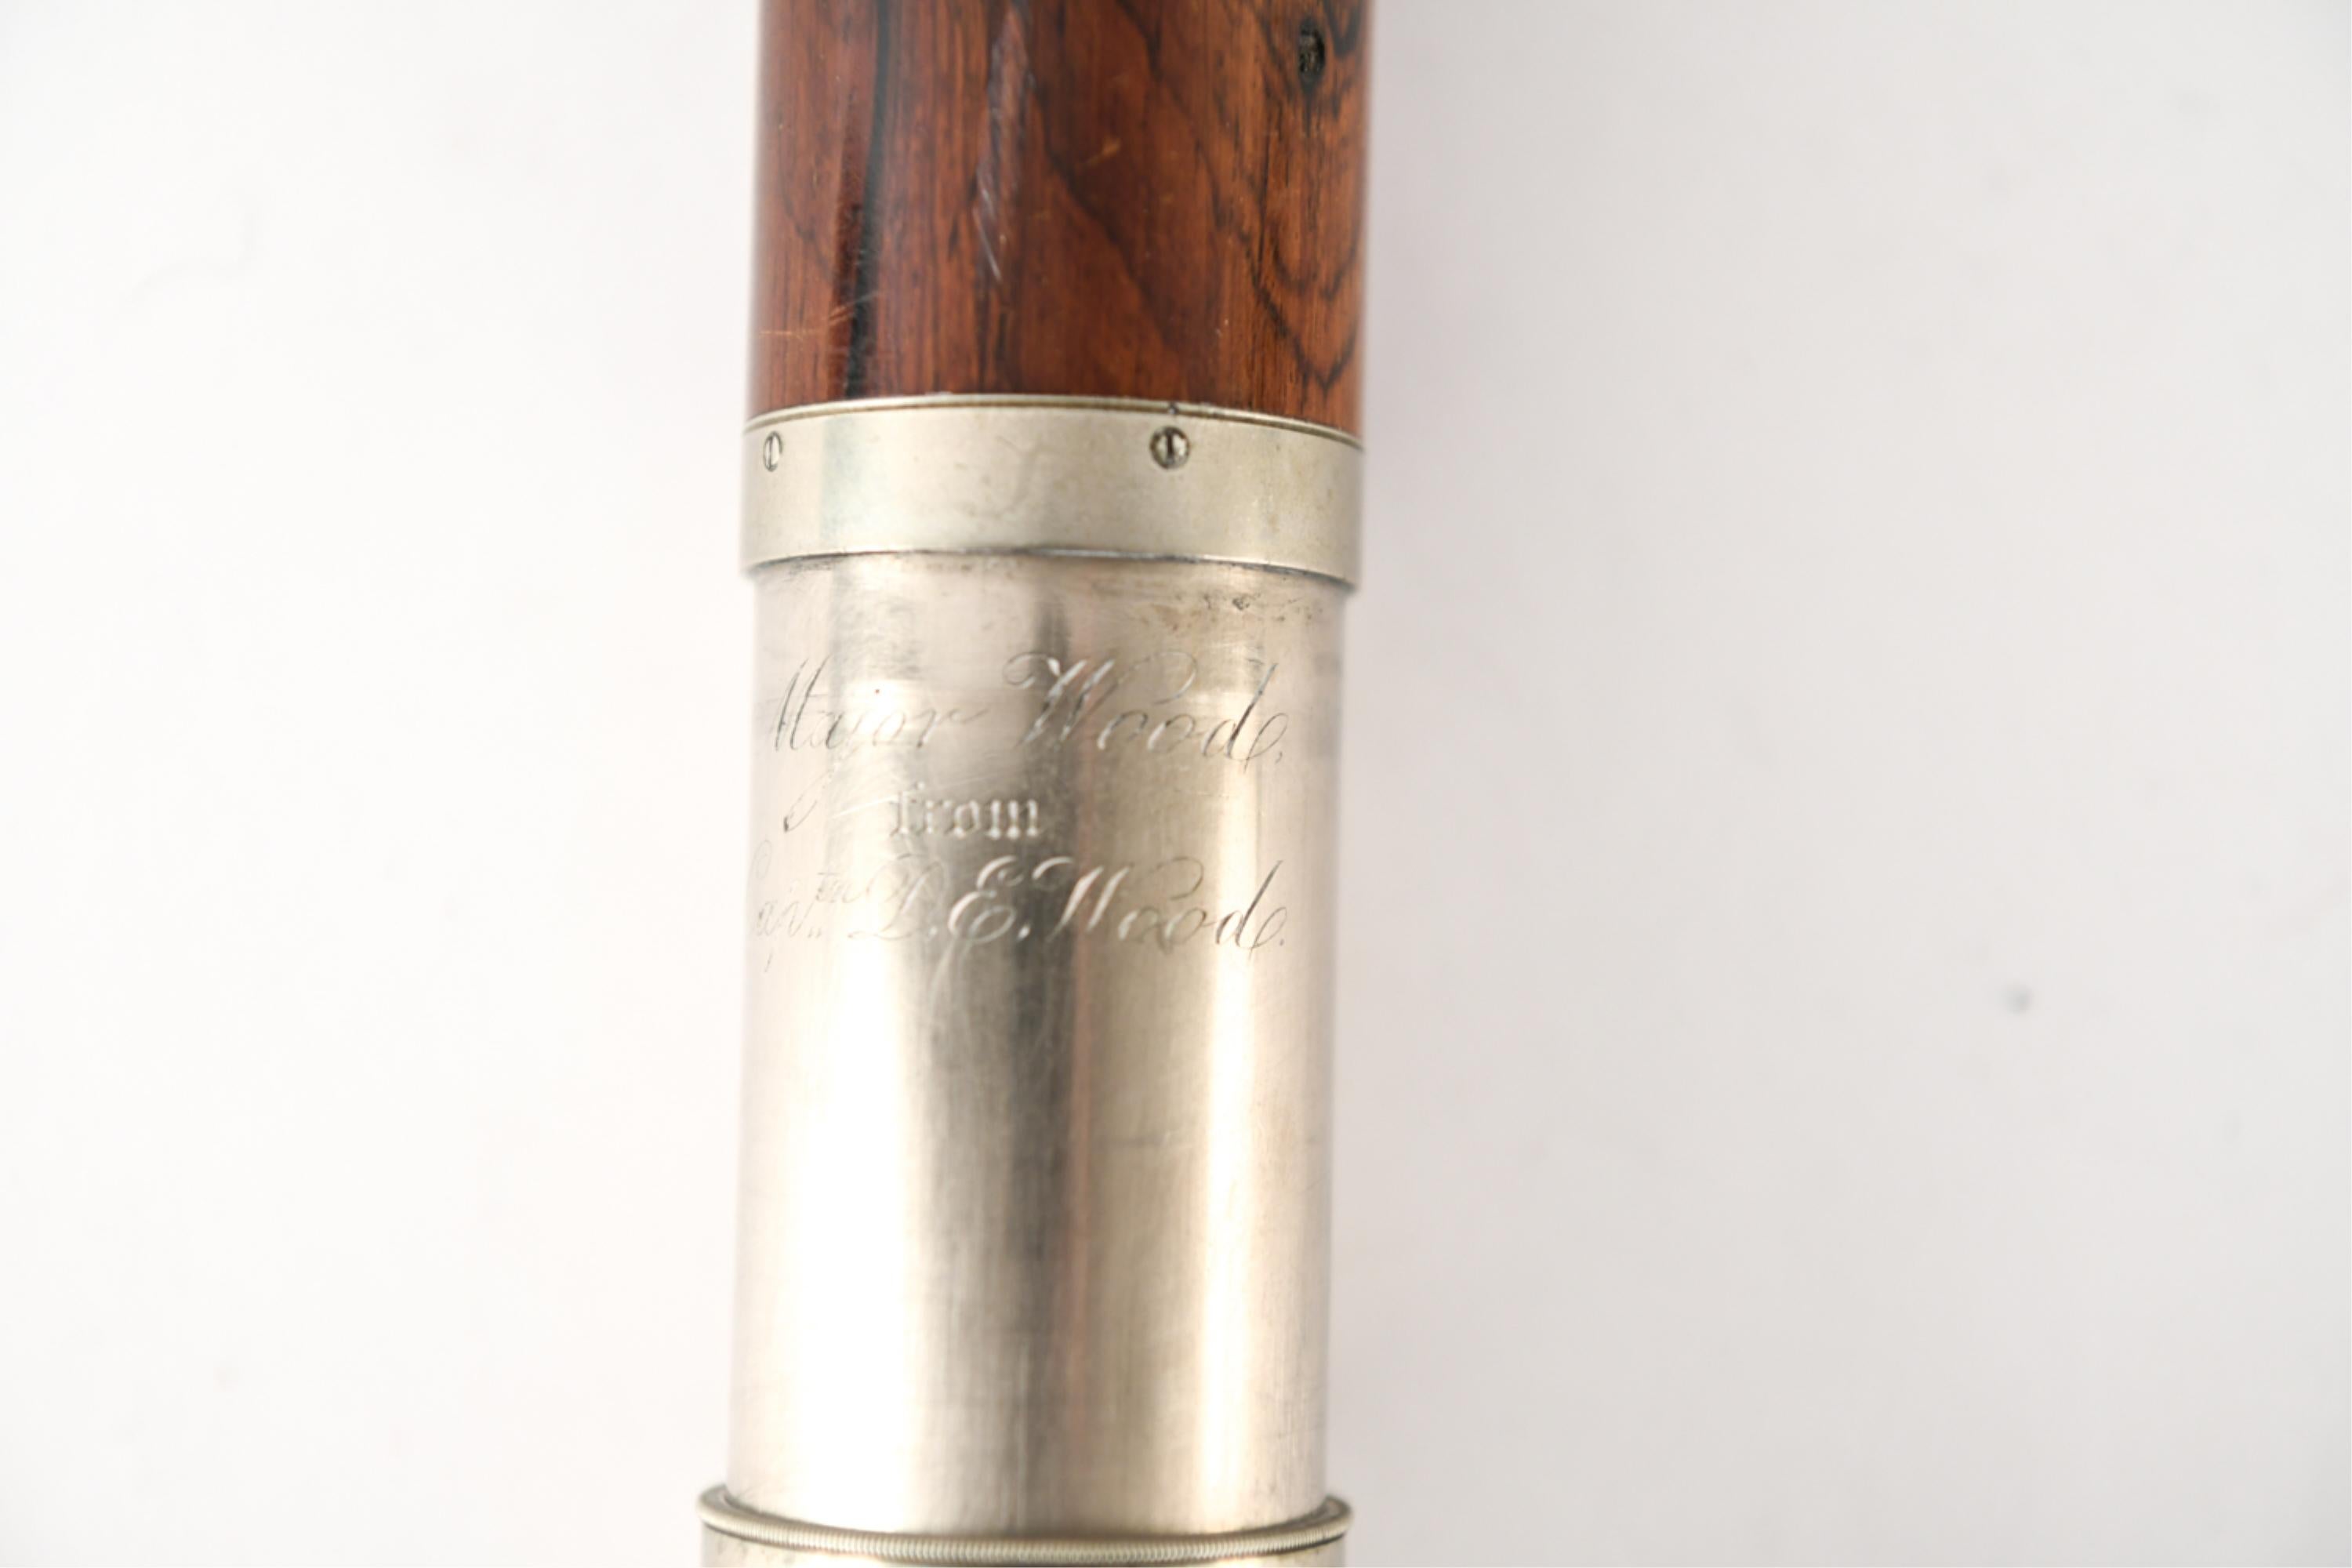 Metal D.E. Wood Inscribed Nautical Telescope & Compass with Rosewood Barrel, c. 1860s